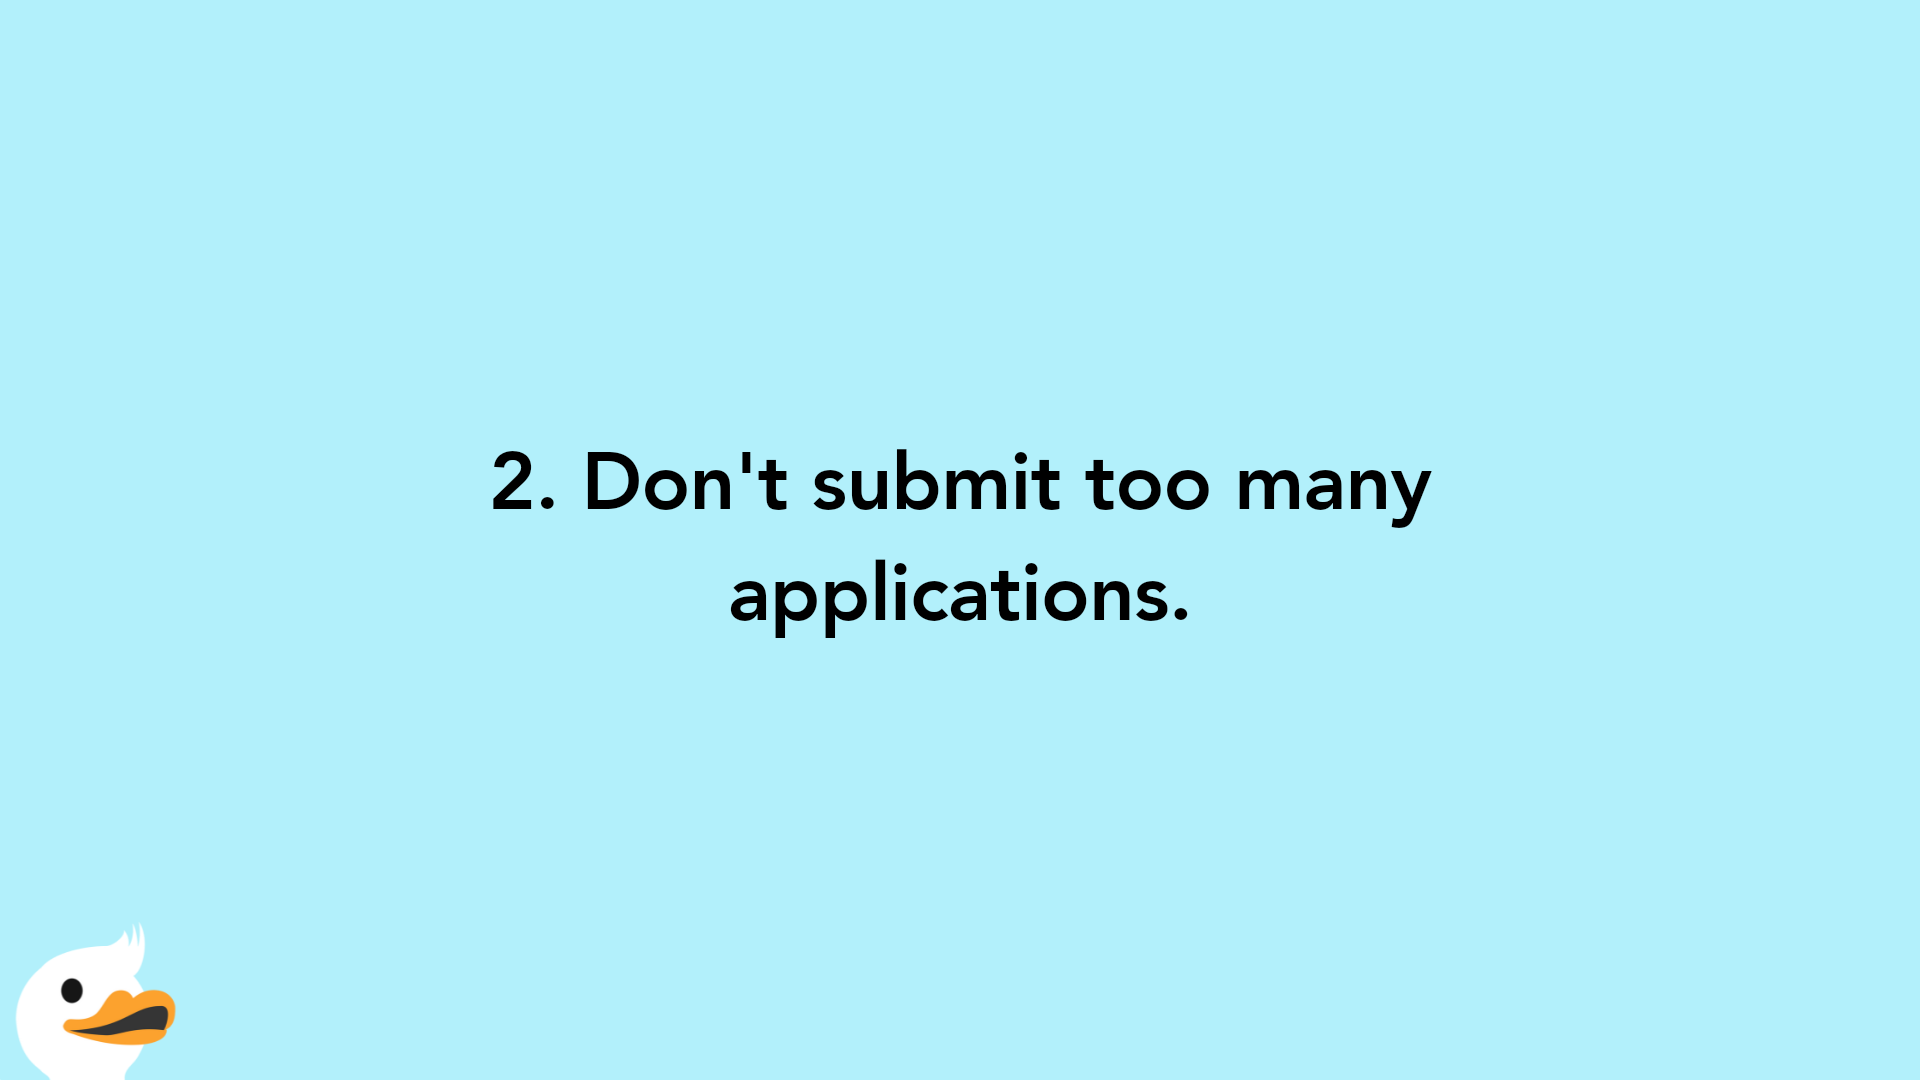 2. Don't submit too many applications.